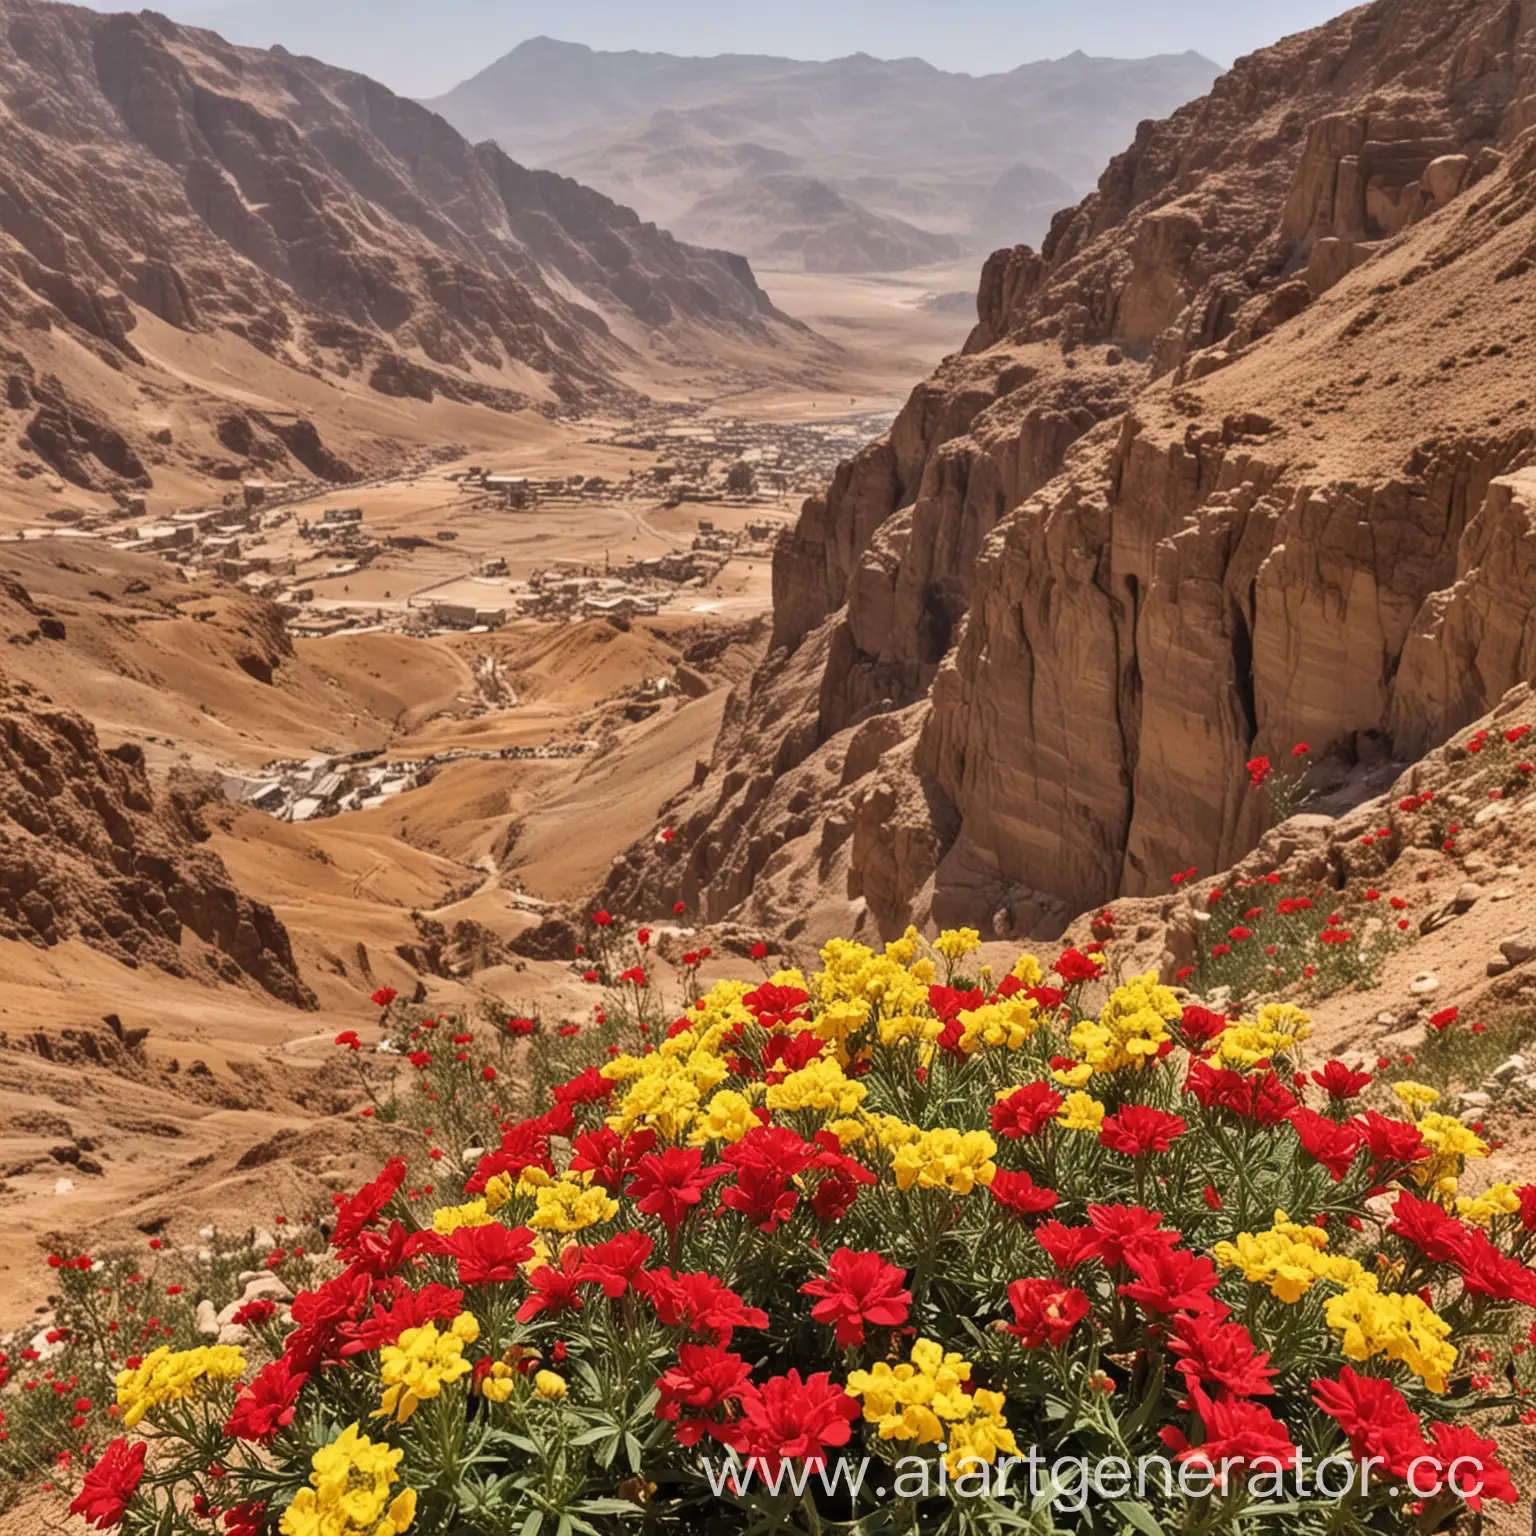 Vibrant-Crown-Atop-Majestic-Egyptian-Mountains-Amidst-Blossoming-Flowers